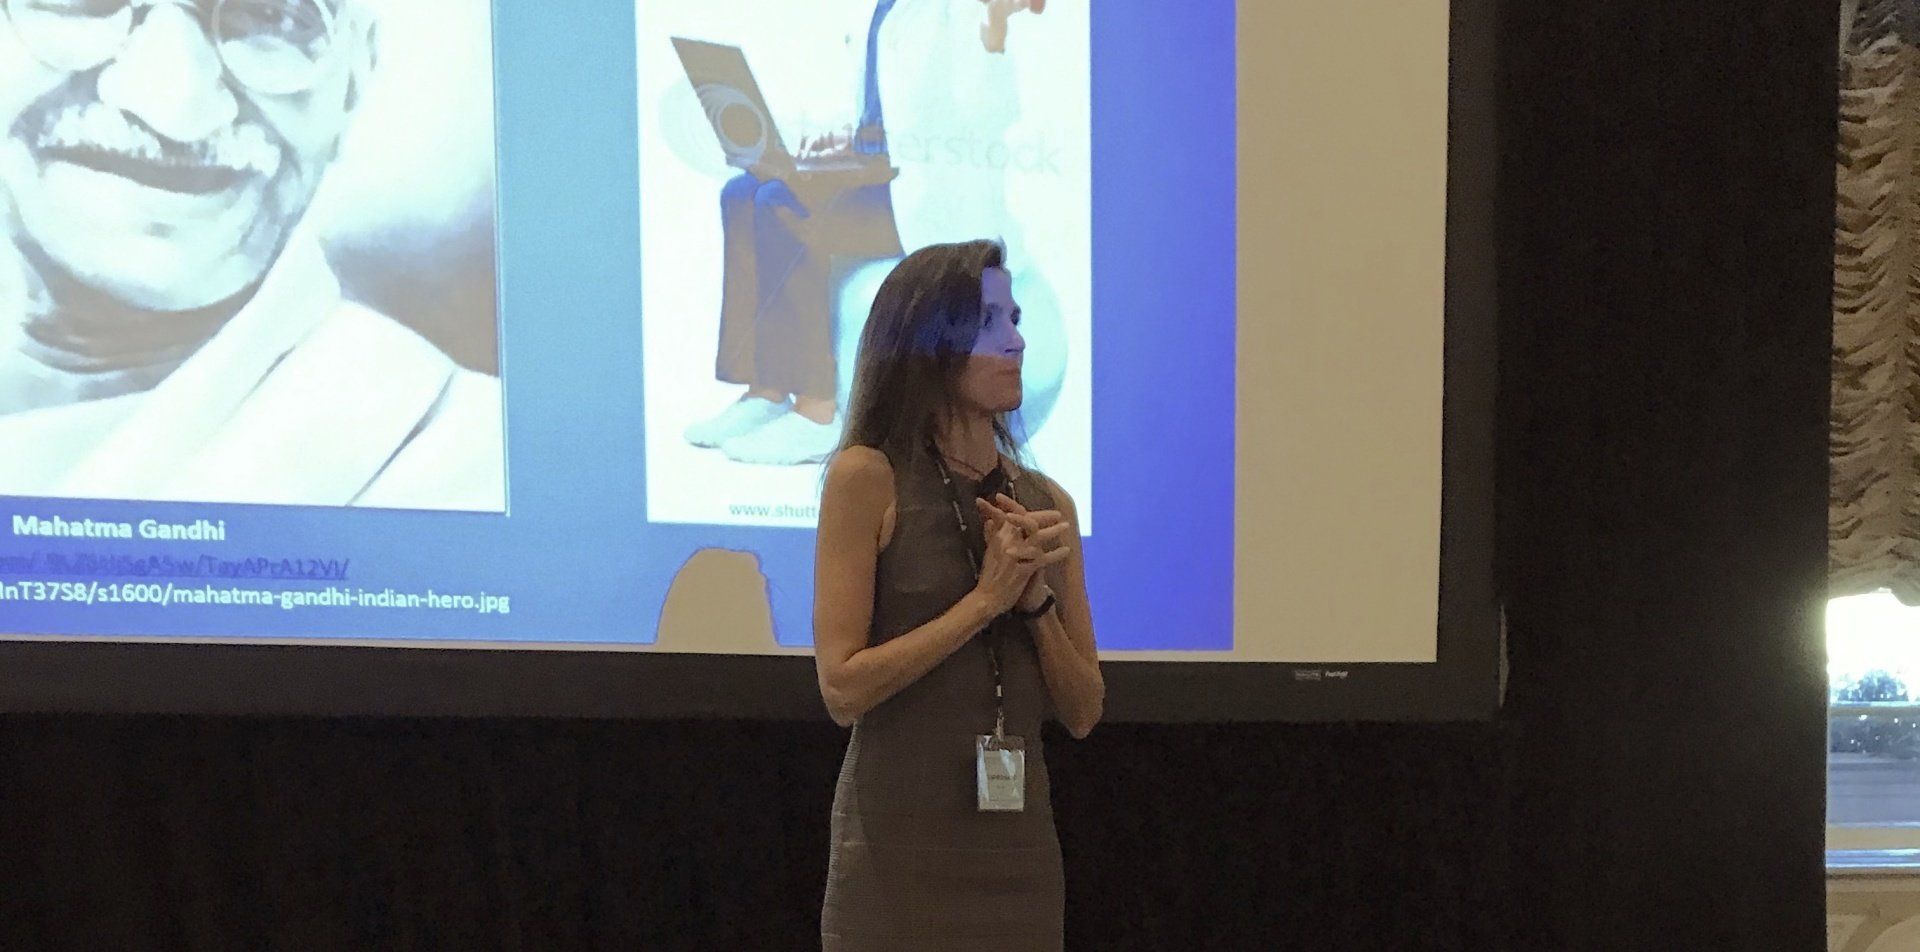 Dr. Beth Frates giving a presentation at the Benson-Henry Institute for Mind Body Medicine.